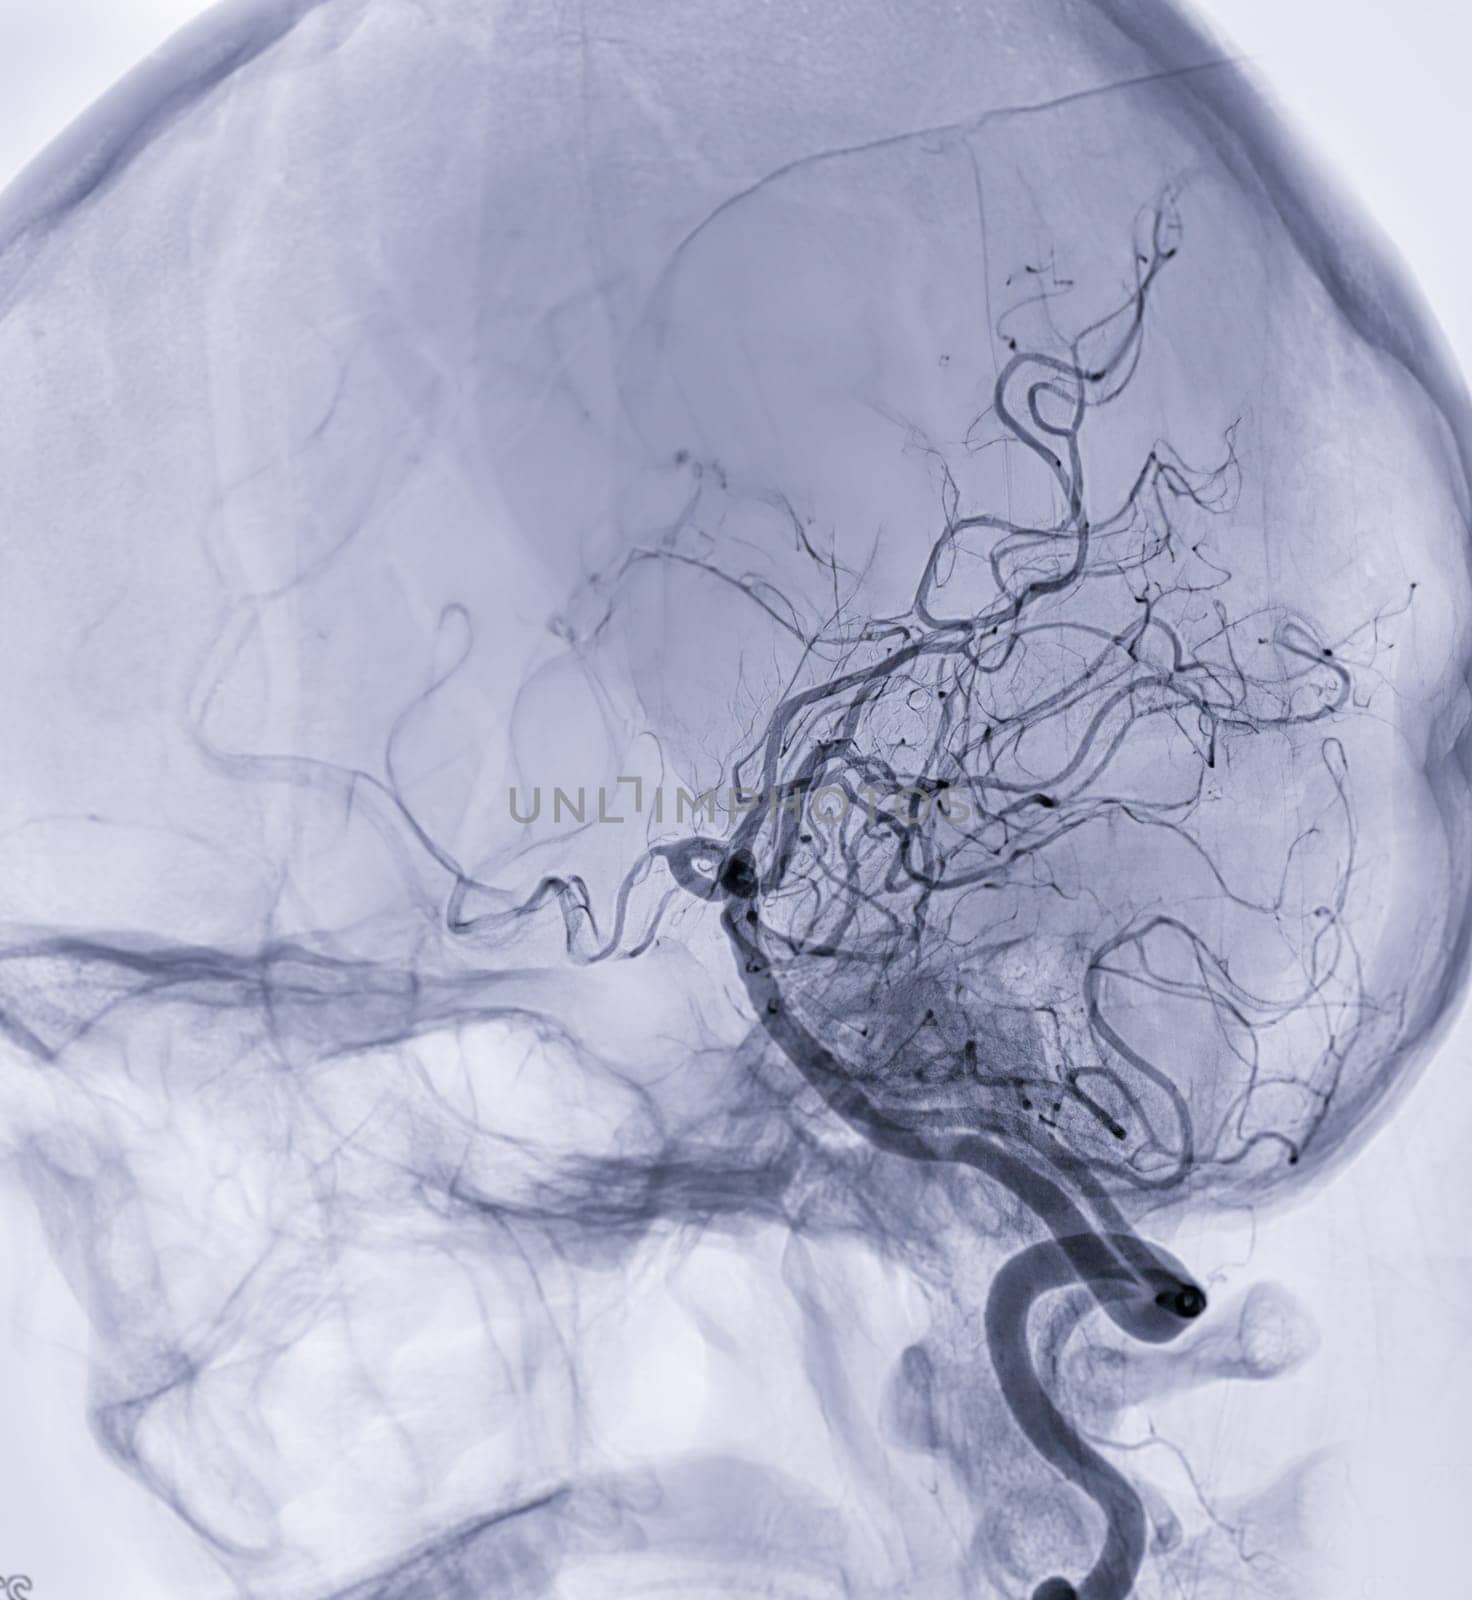 Cerebral angiography  imageor potesterior cerebral artery from Fluoroscopy in intervention radiology  showing cerebral artery. by samunella